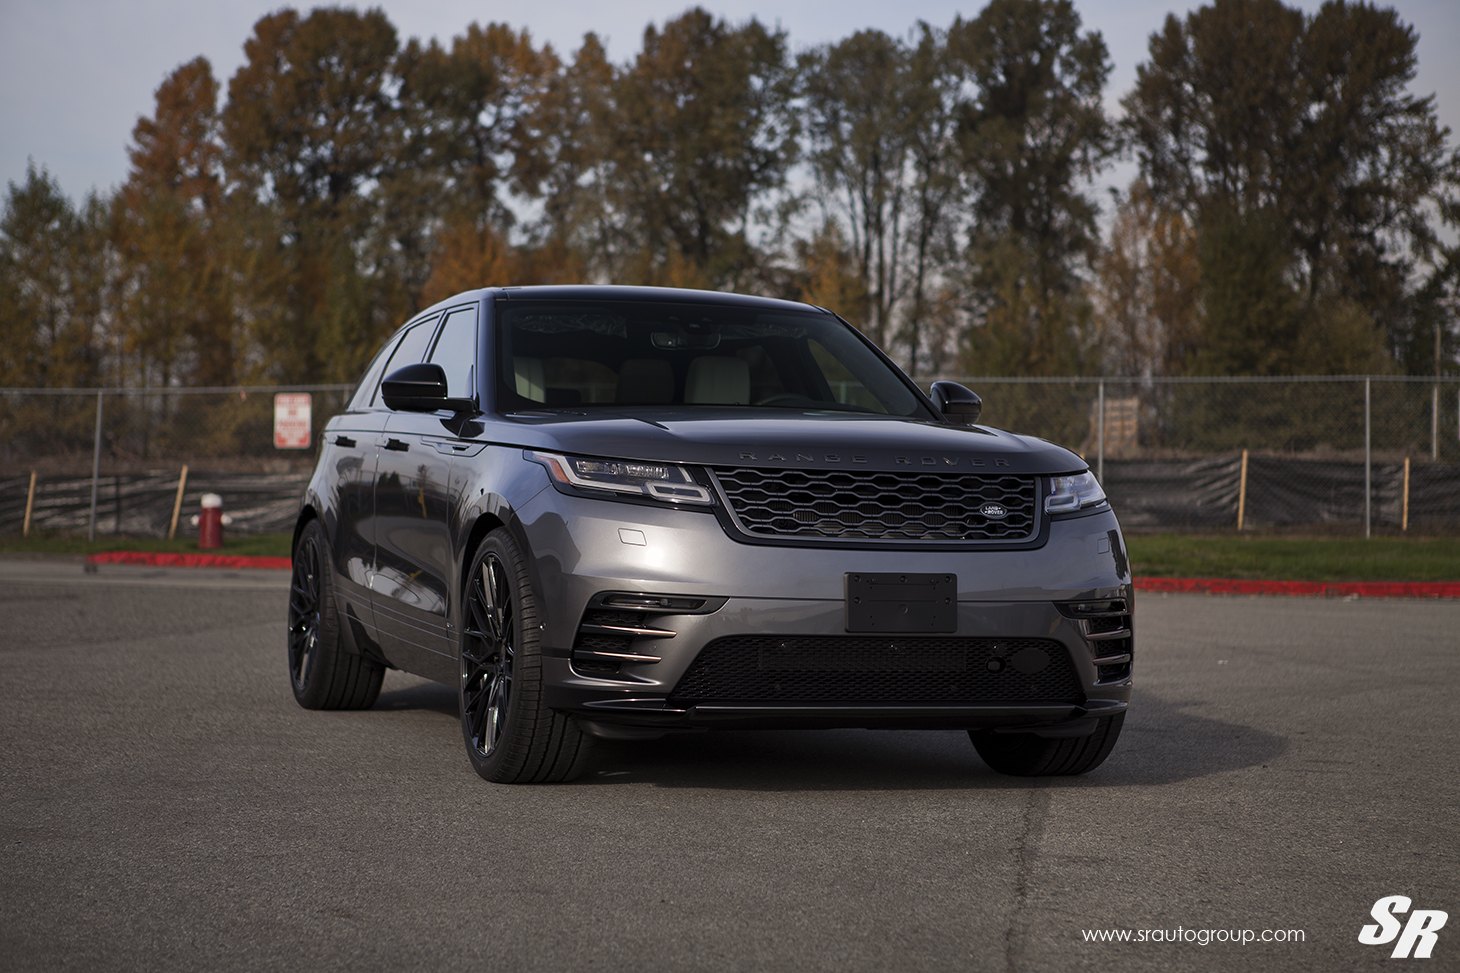 Black Range Rover Velar with Custom Mesh Grille - Photo by SR Auto Group